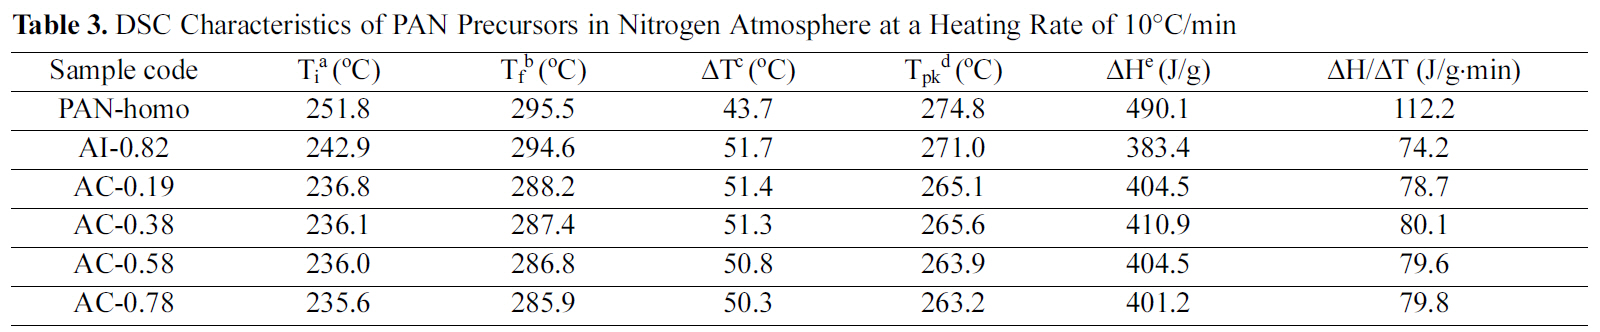 DSC Characteristics of PAN Precursors in Nitrogen Atmosphere at a Heating Rate of 10°C/min